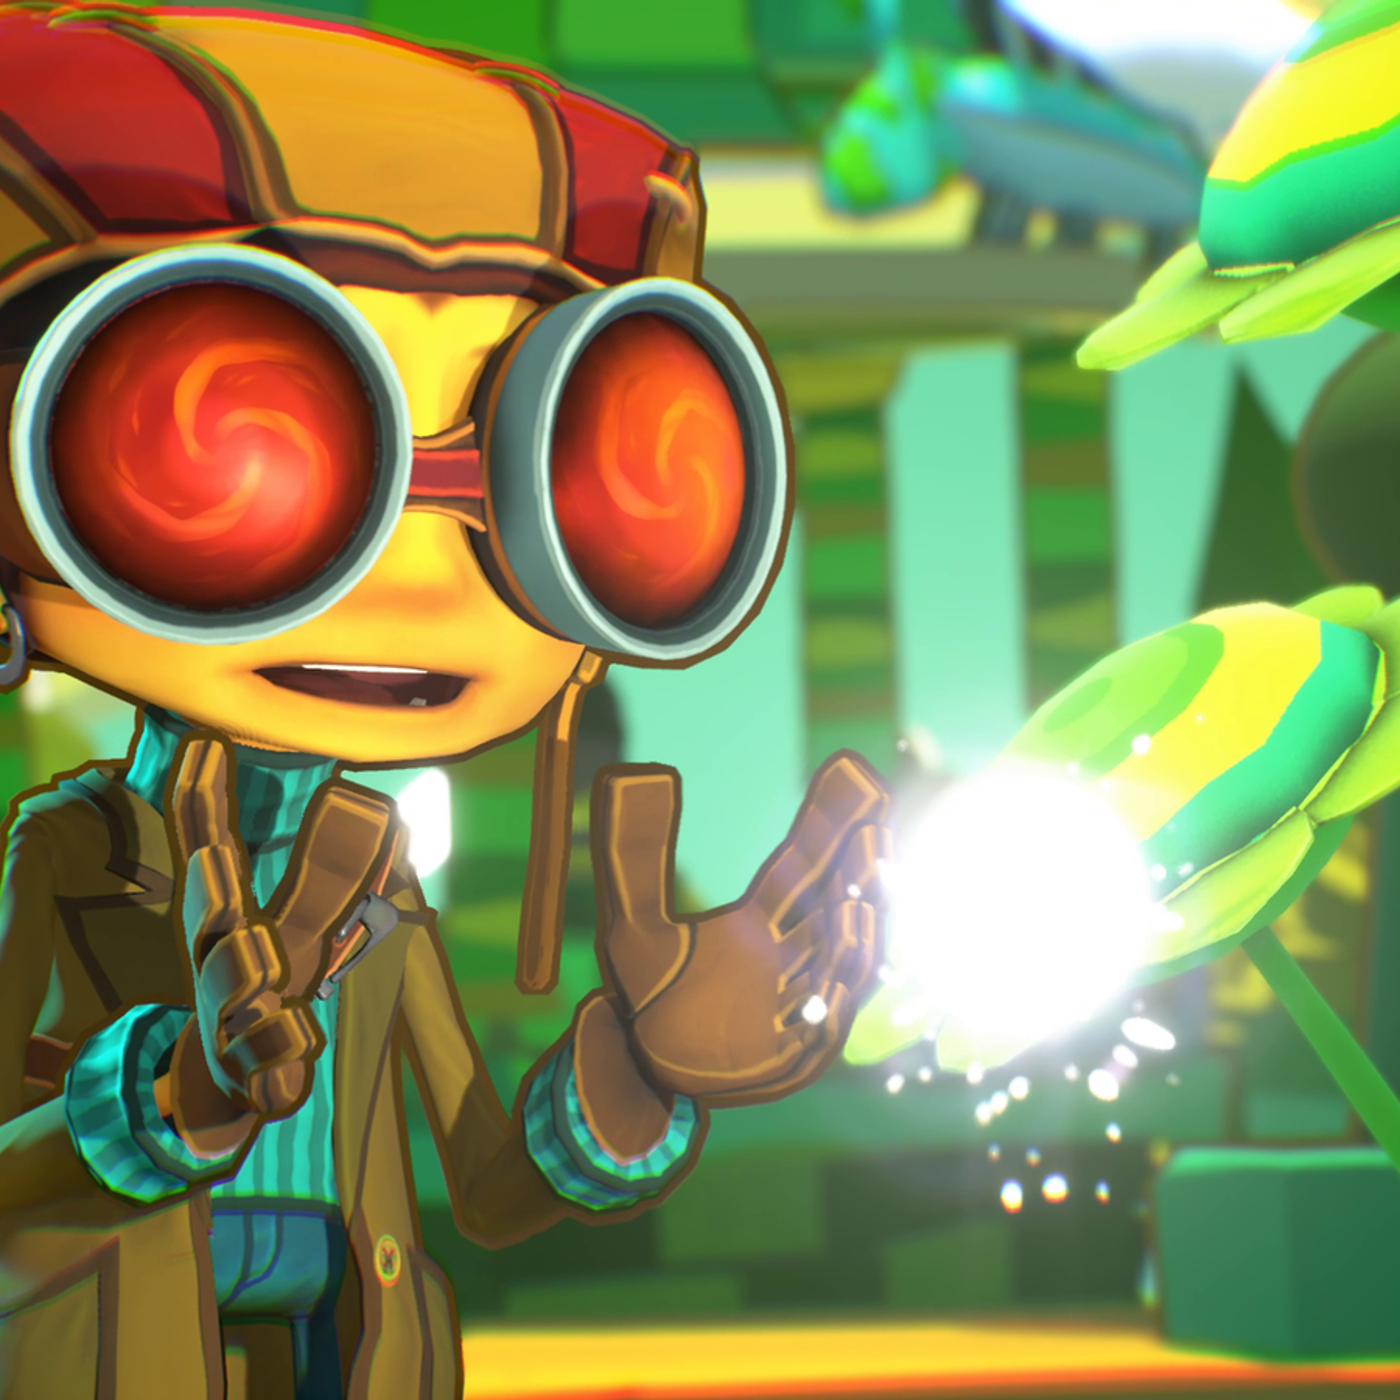 S16 Ep1164: Why Psychonauts 2 is the most important game of 2021